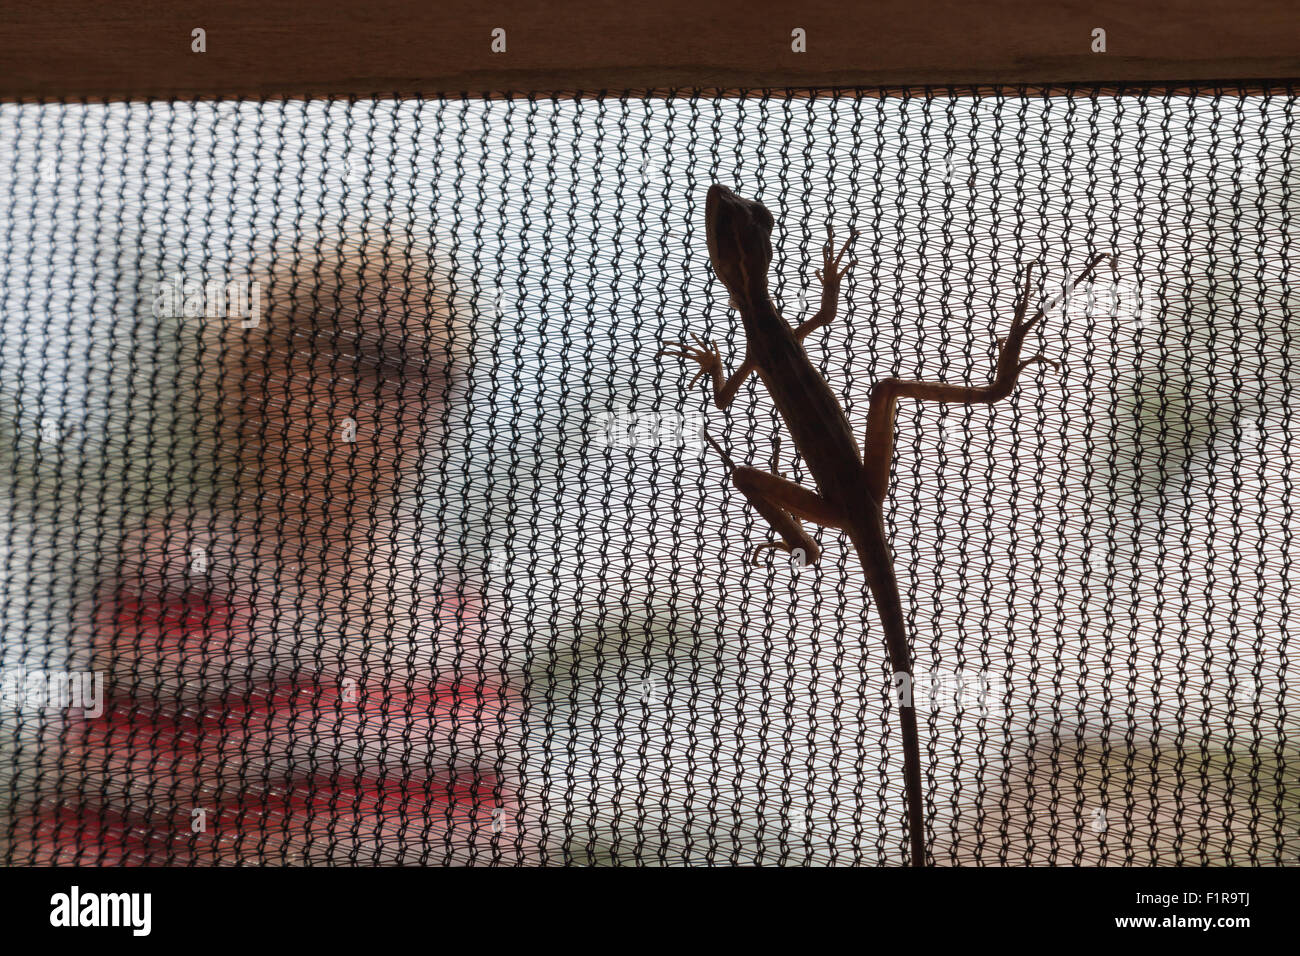 A small lizard hiding inside a porch climbing up a screen and unnoticed by passers by. Stock Photo